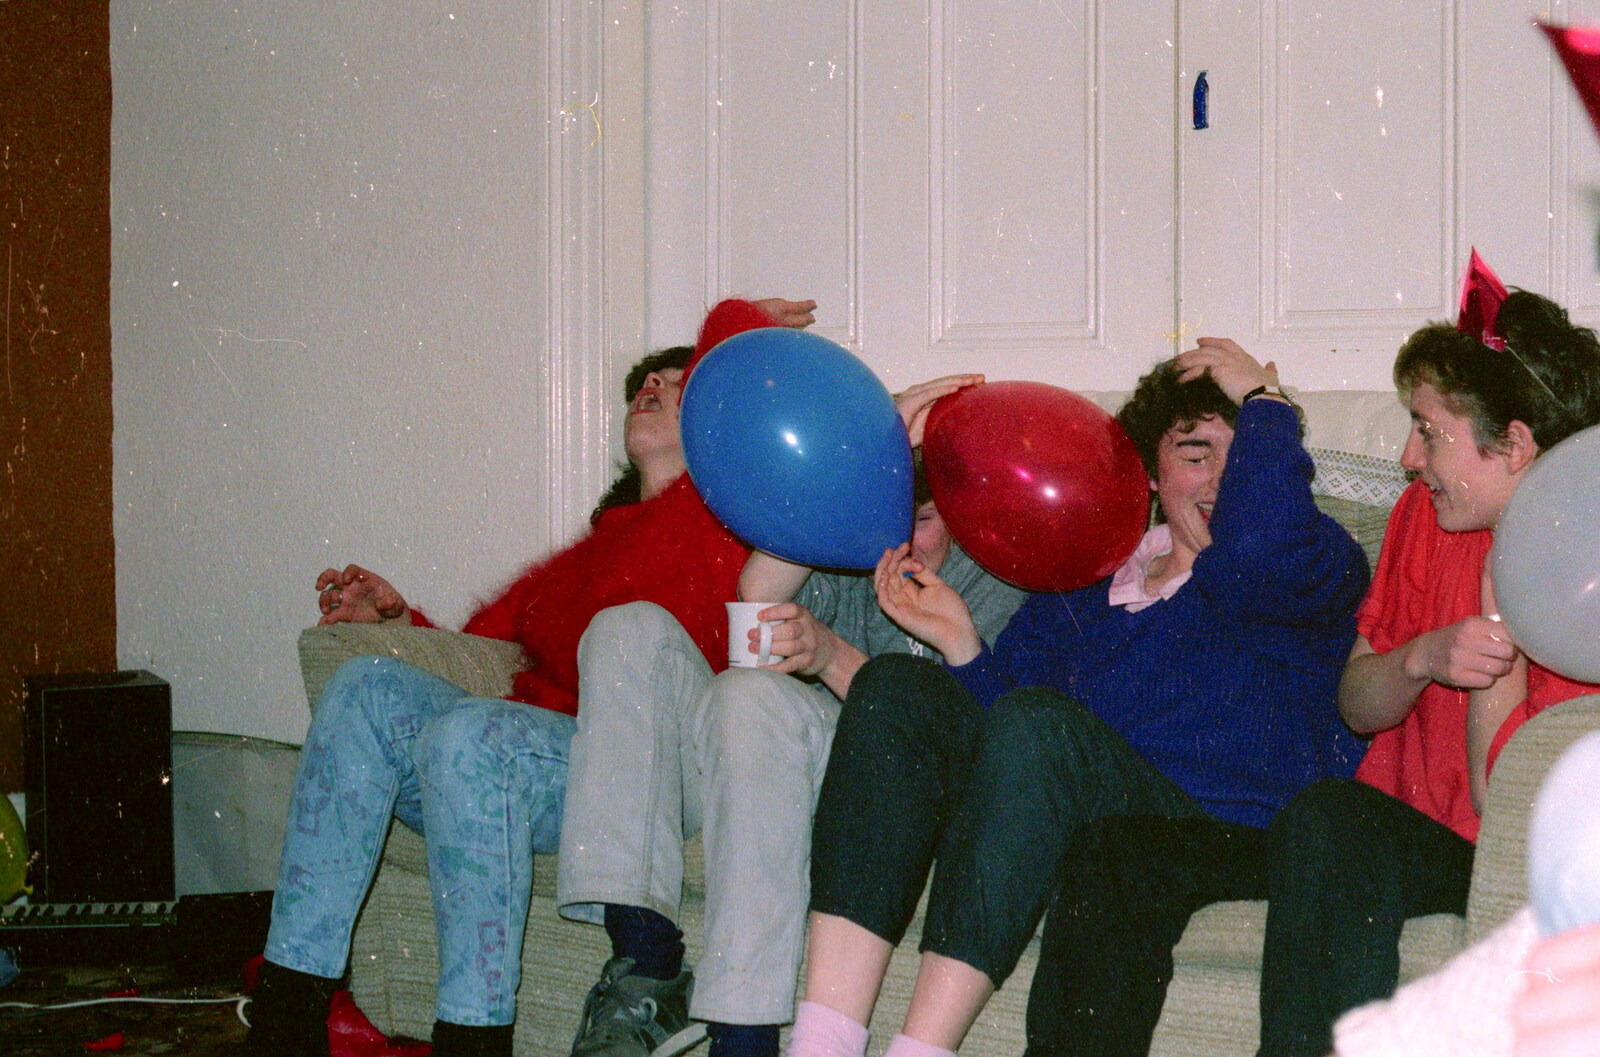 More sofa messing around from Uni: BABS Christmas Ball and a Beaumont Street Party, Plymouth - 16th December 1985